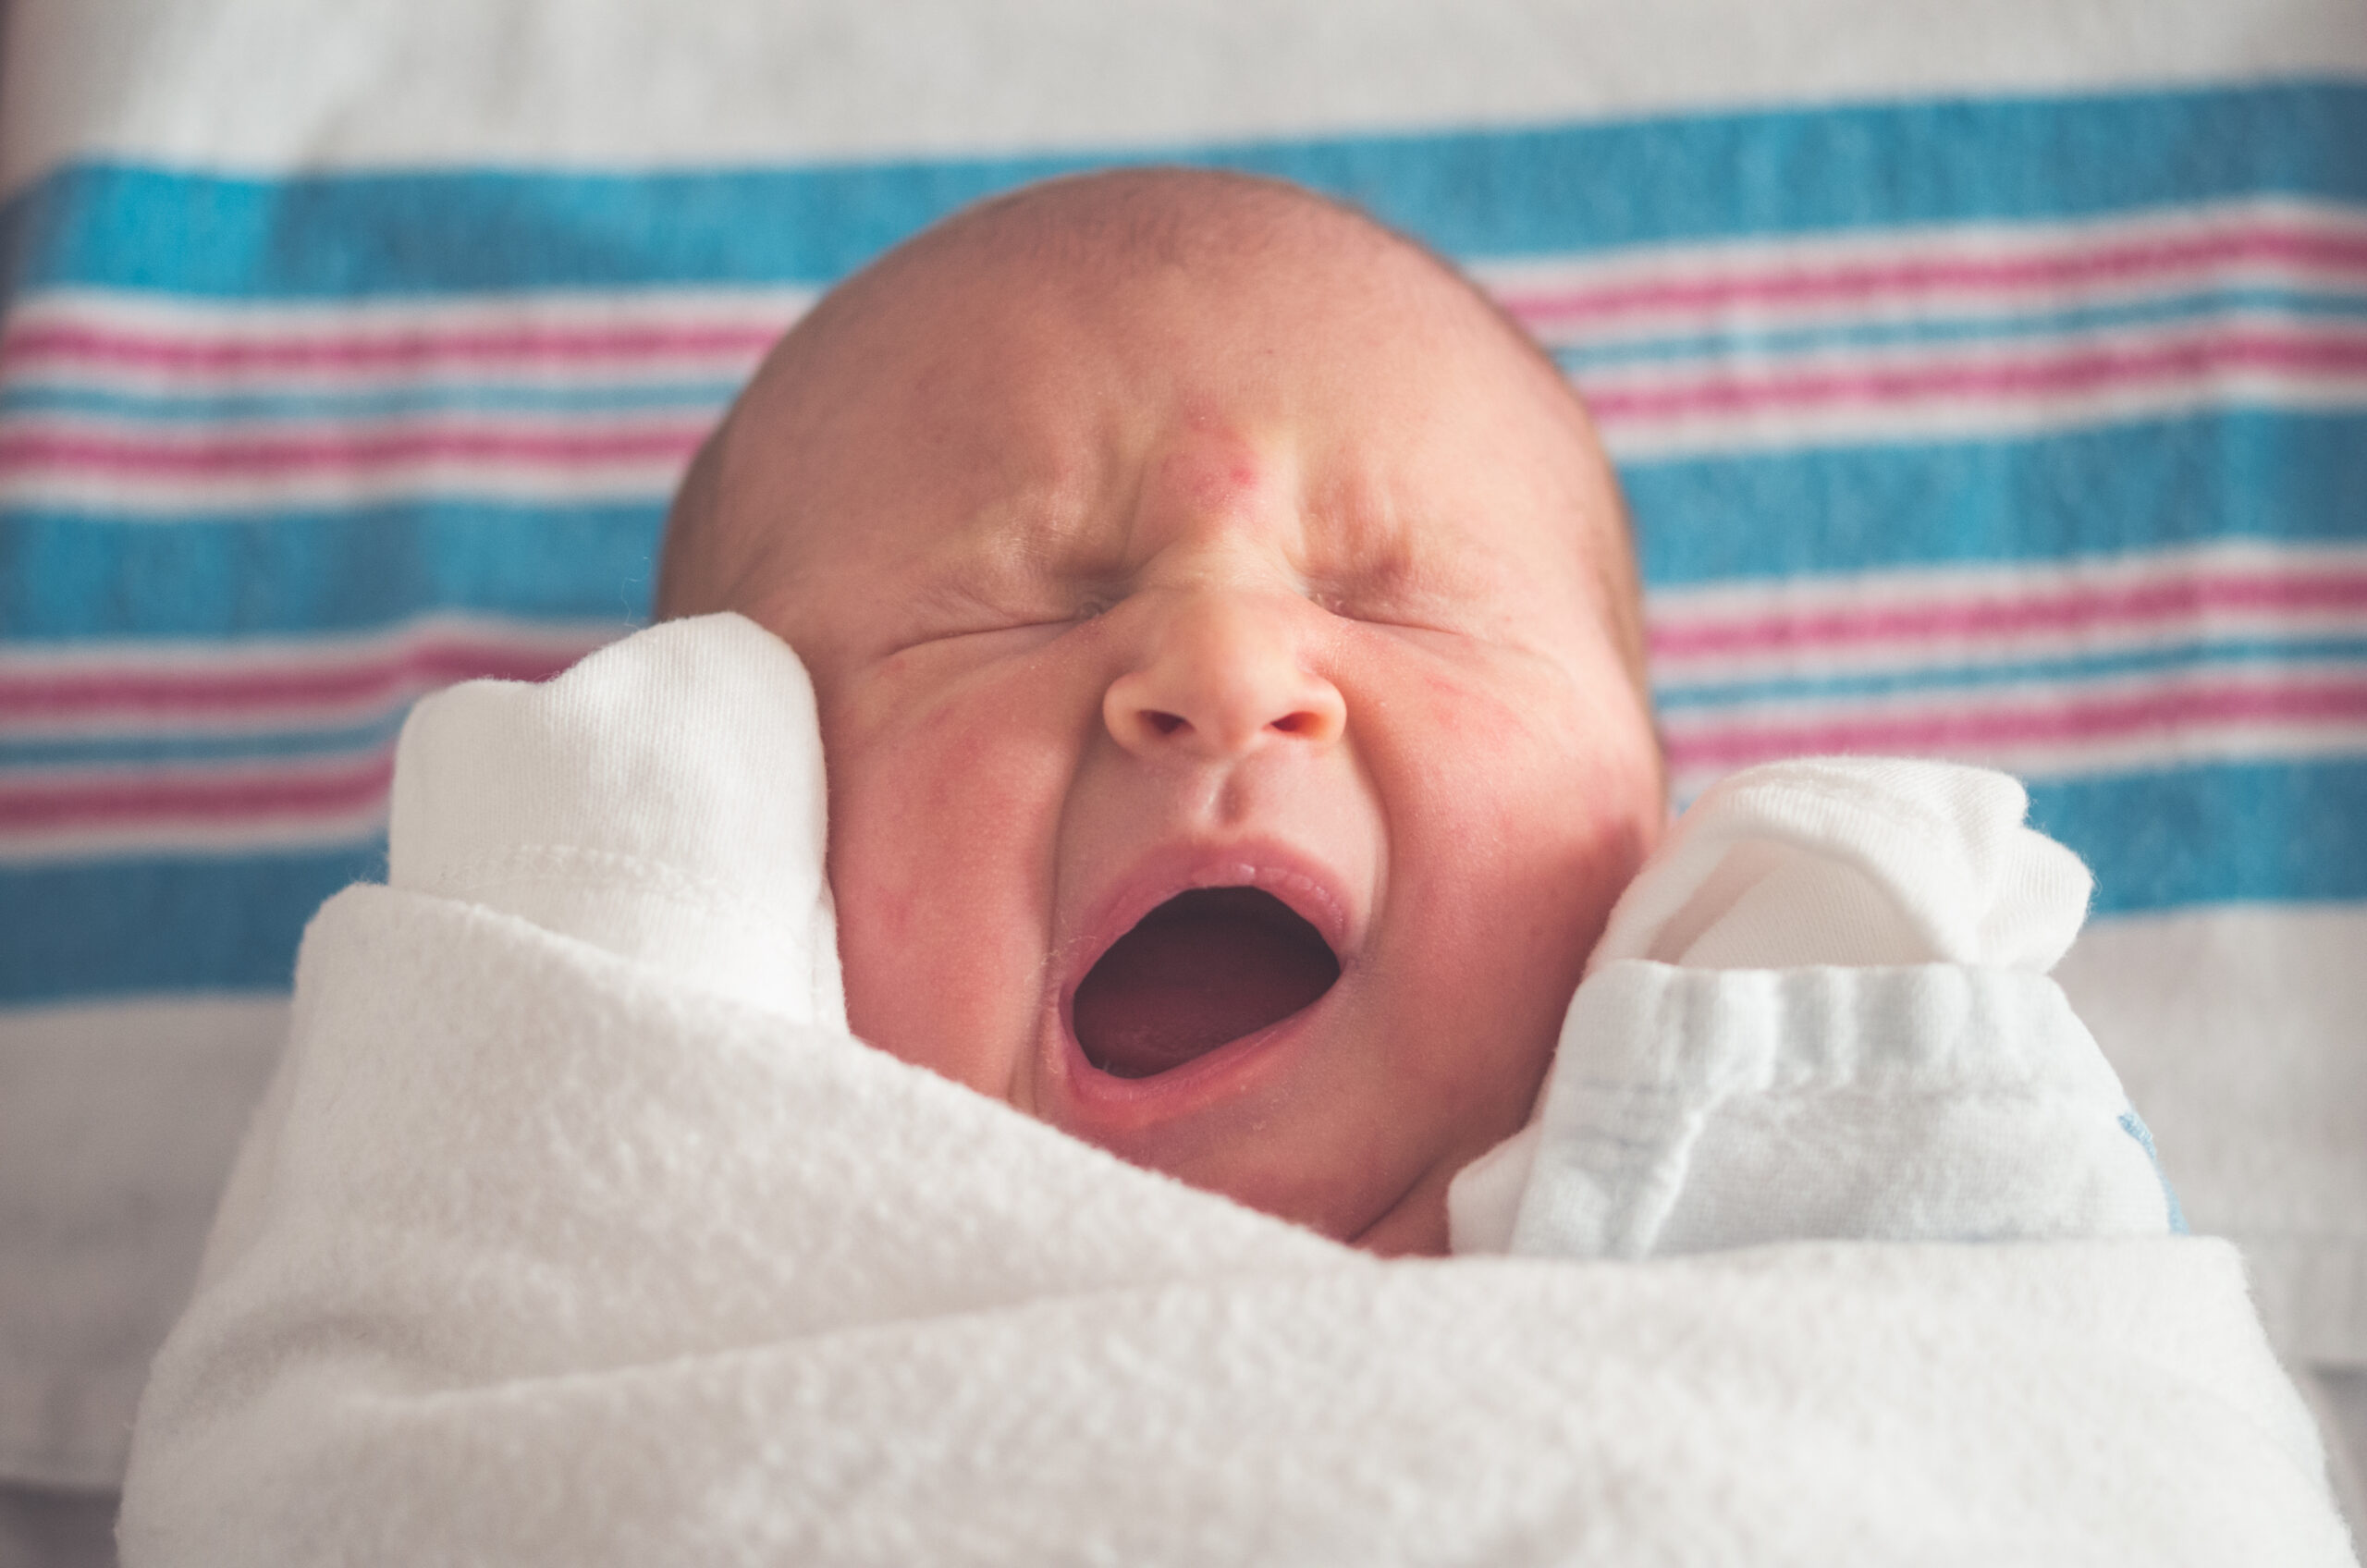 wake windows by age to prevent an overtired baby | The Peaceful Sleeper